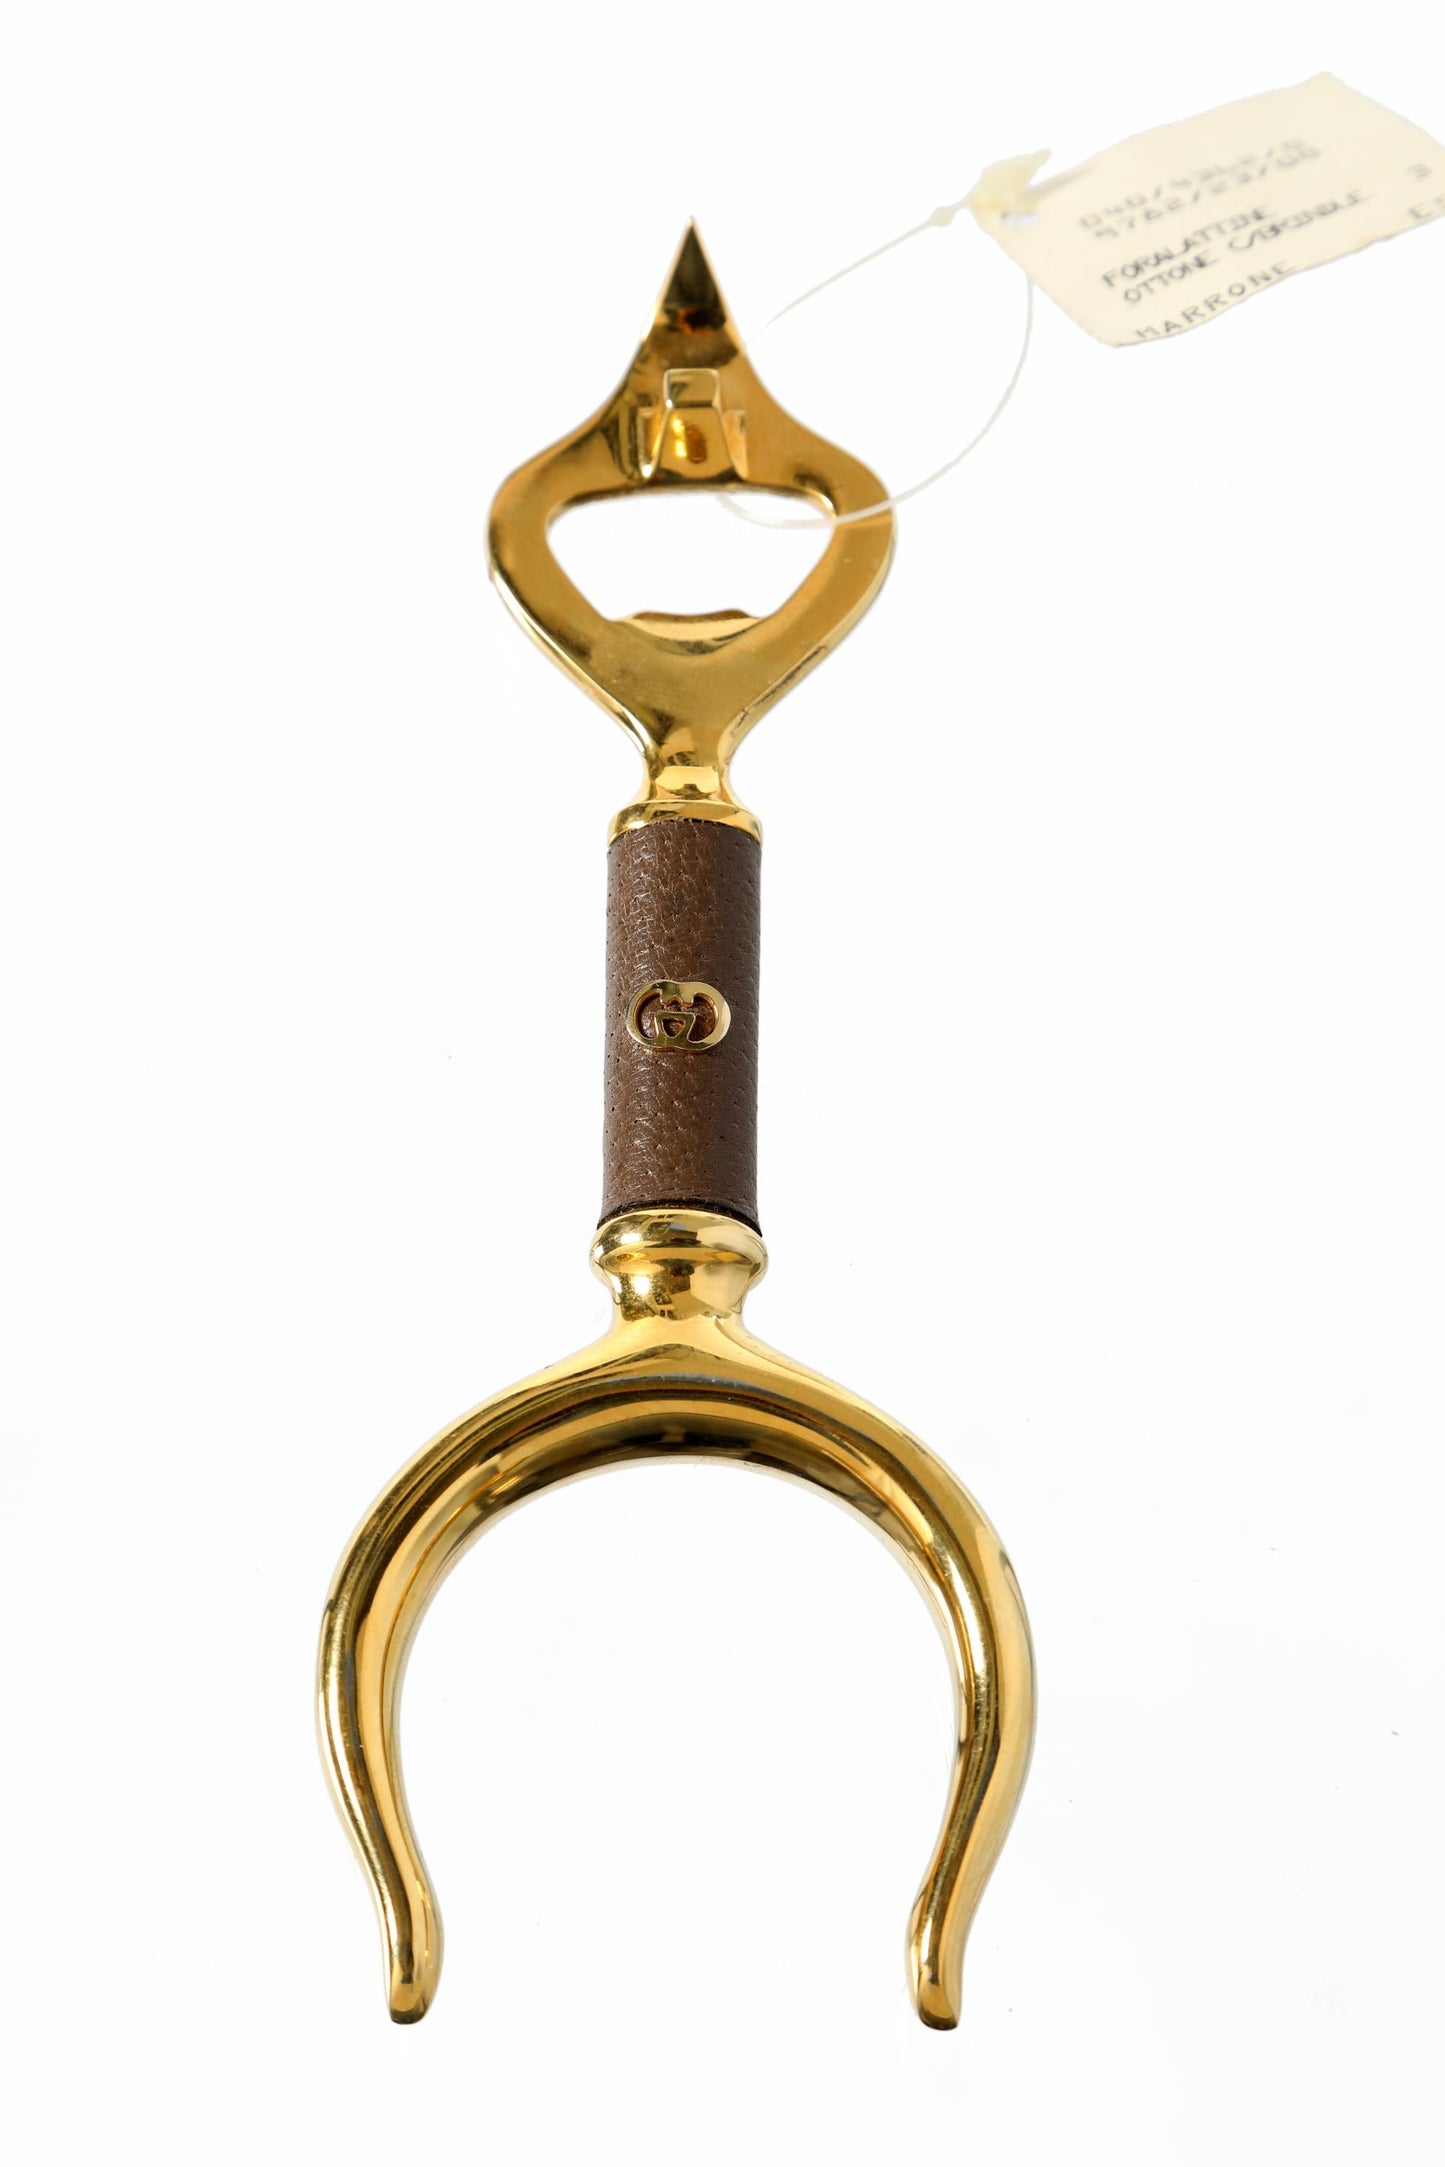 Gucci corkscrew from the 80s